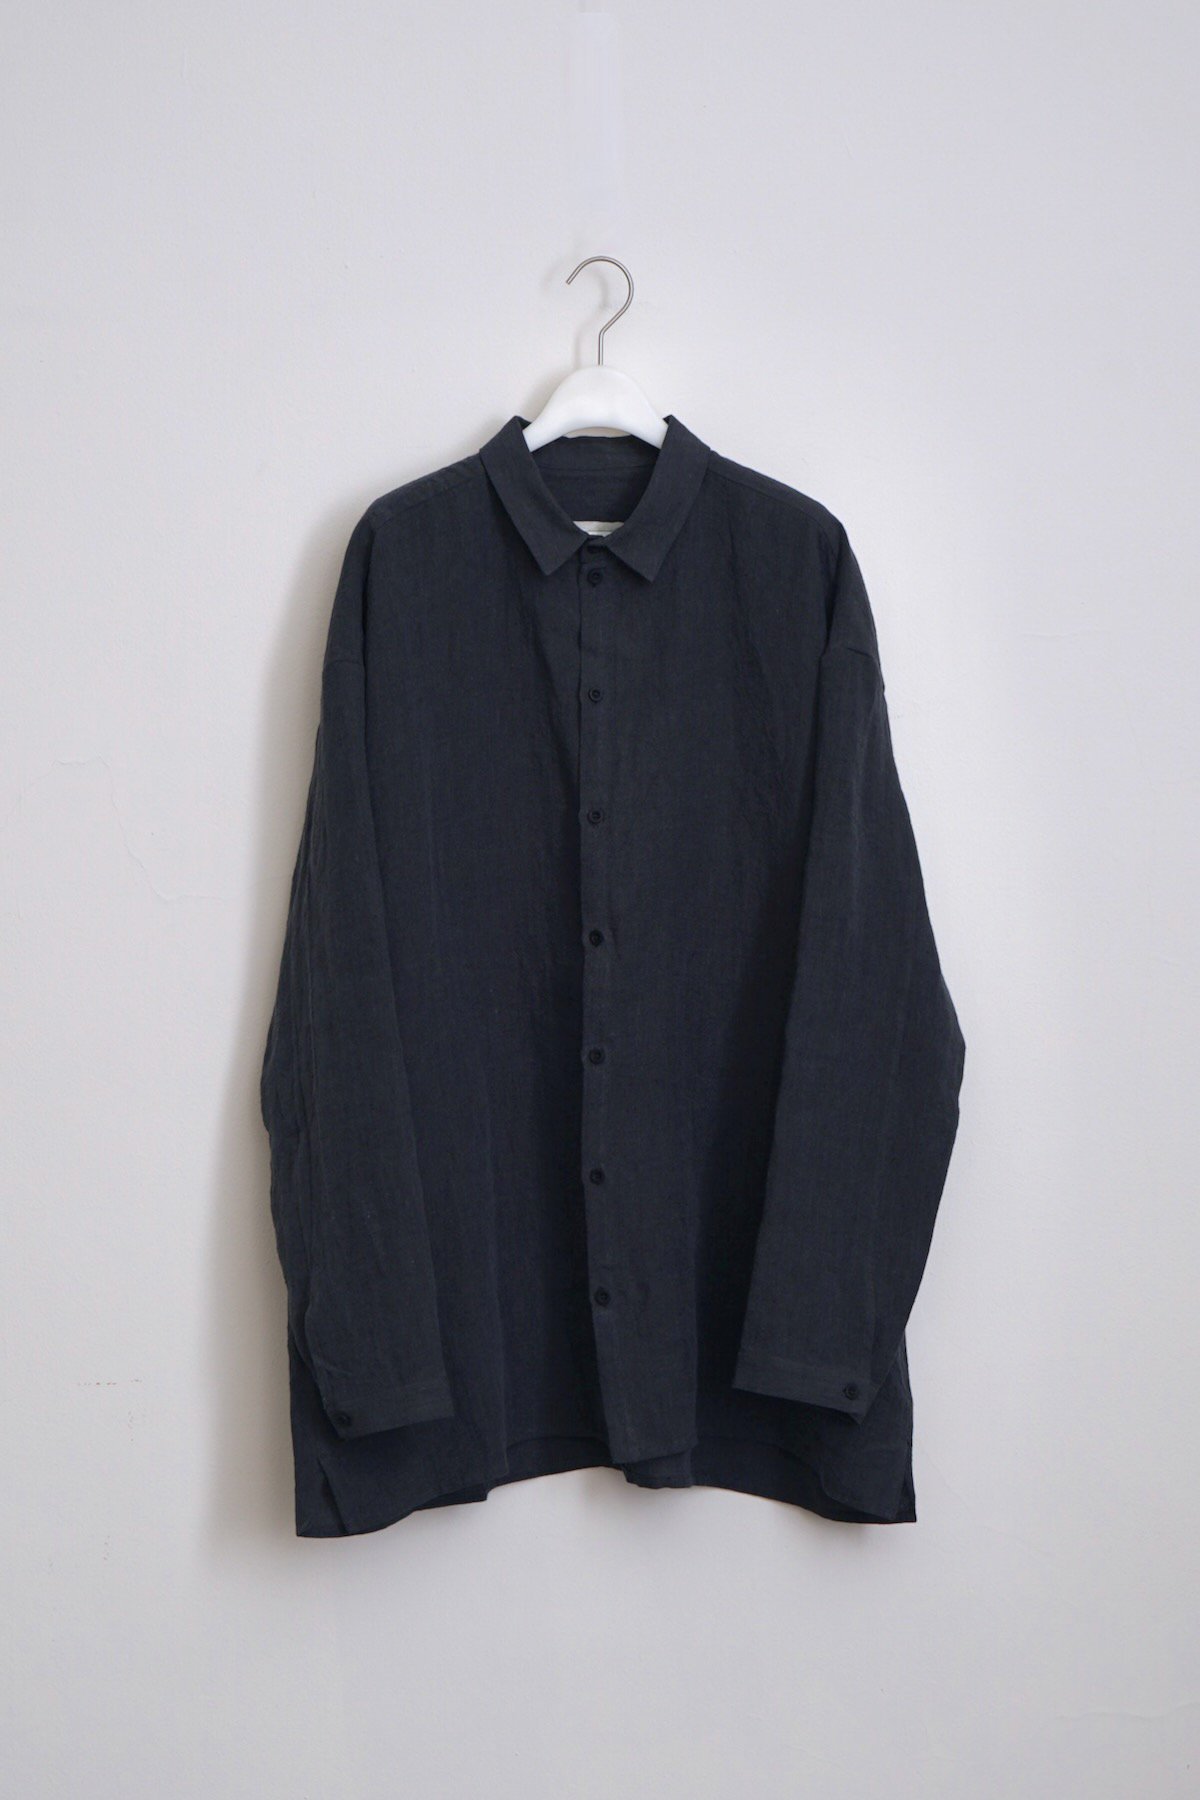 toogood / THE DRAUGHTSMAN SHIRT / LAUNDERED LINEN PEWTER